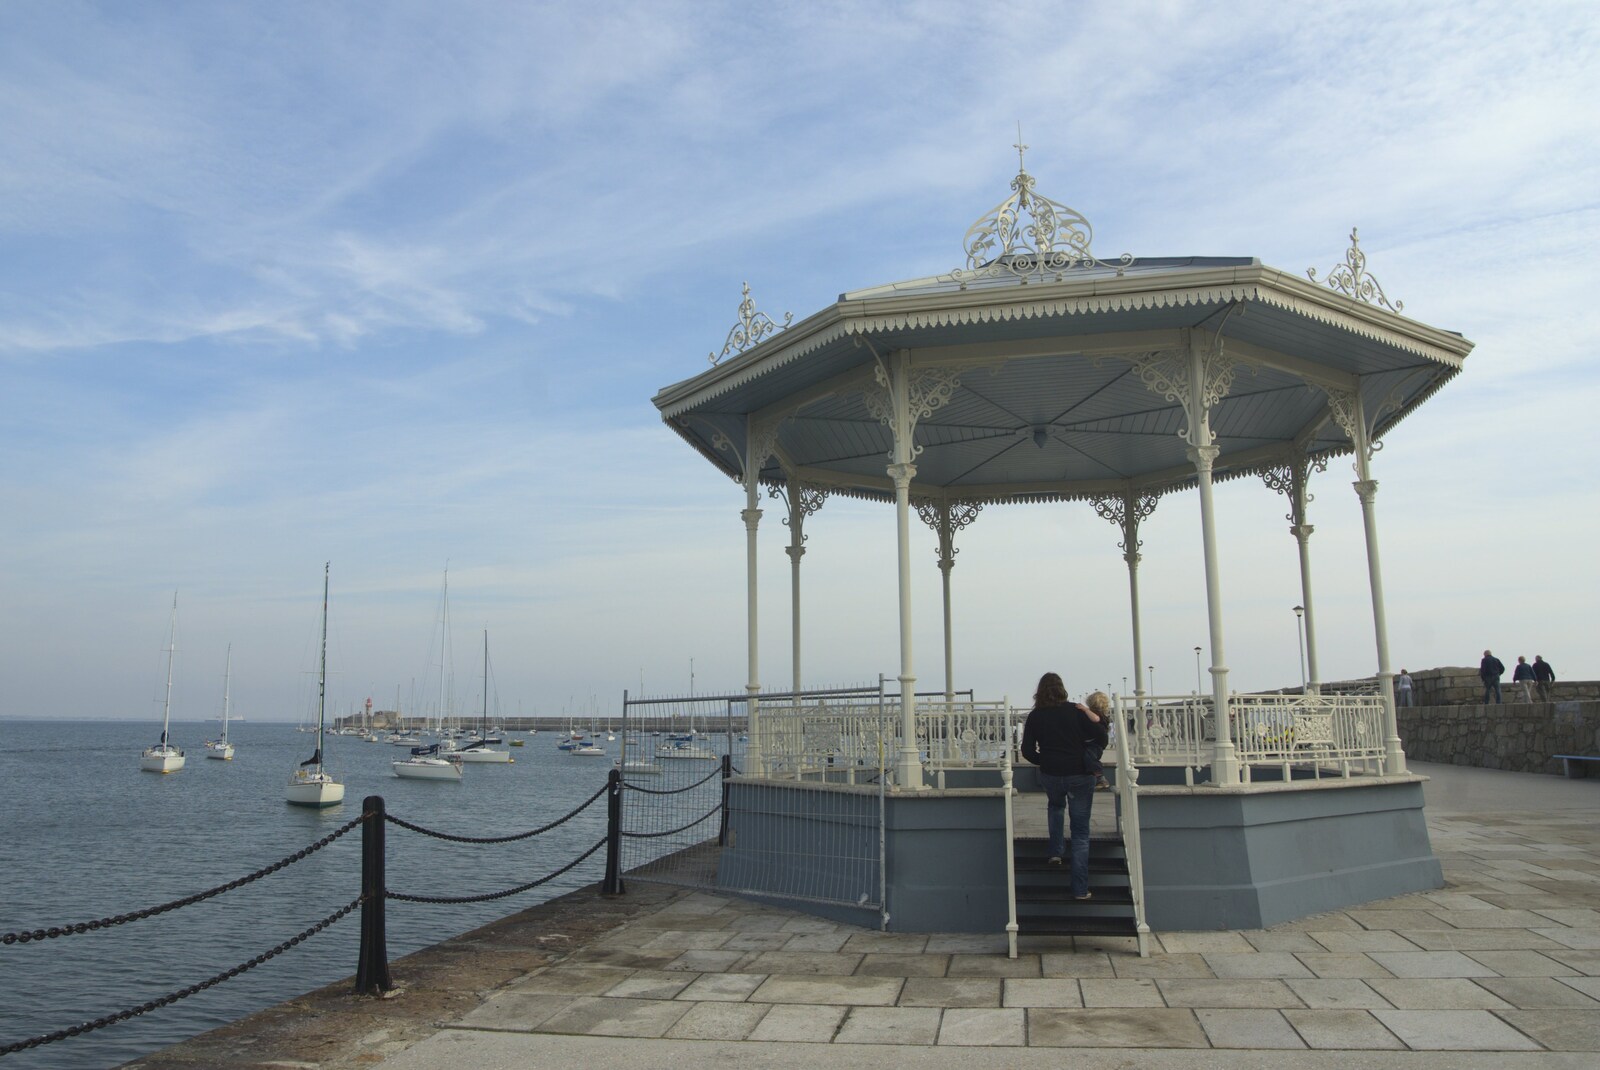 A Day in Dun Laoghaire, County Dublin, Ireland - 3rd September 2010: Sea-side band stand